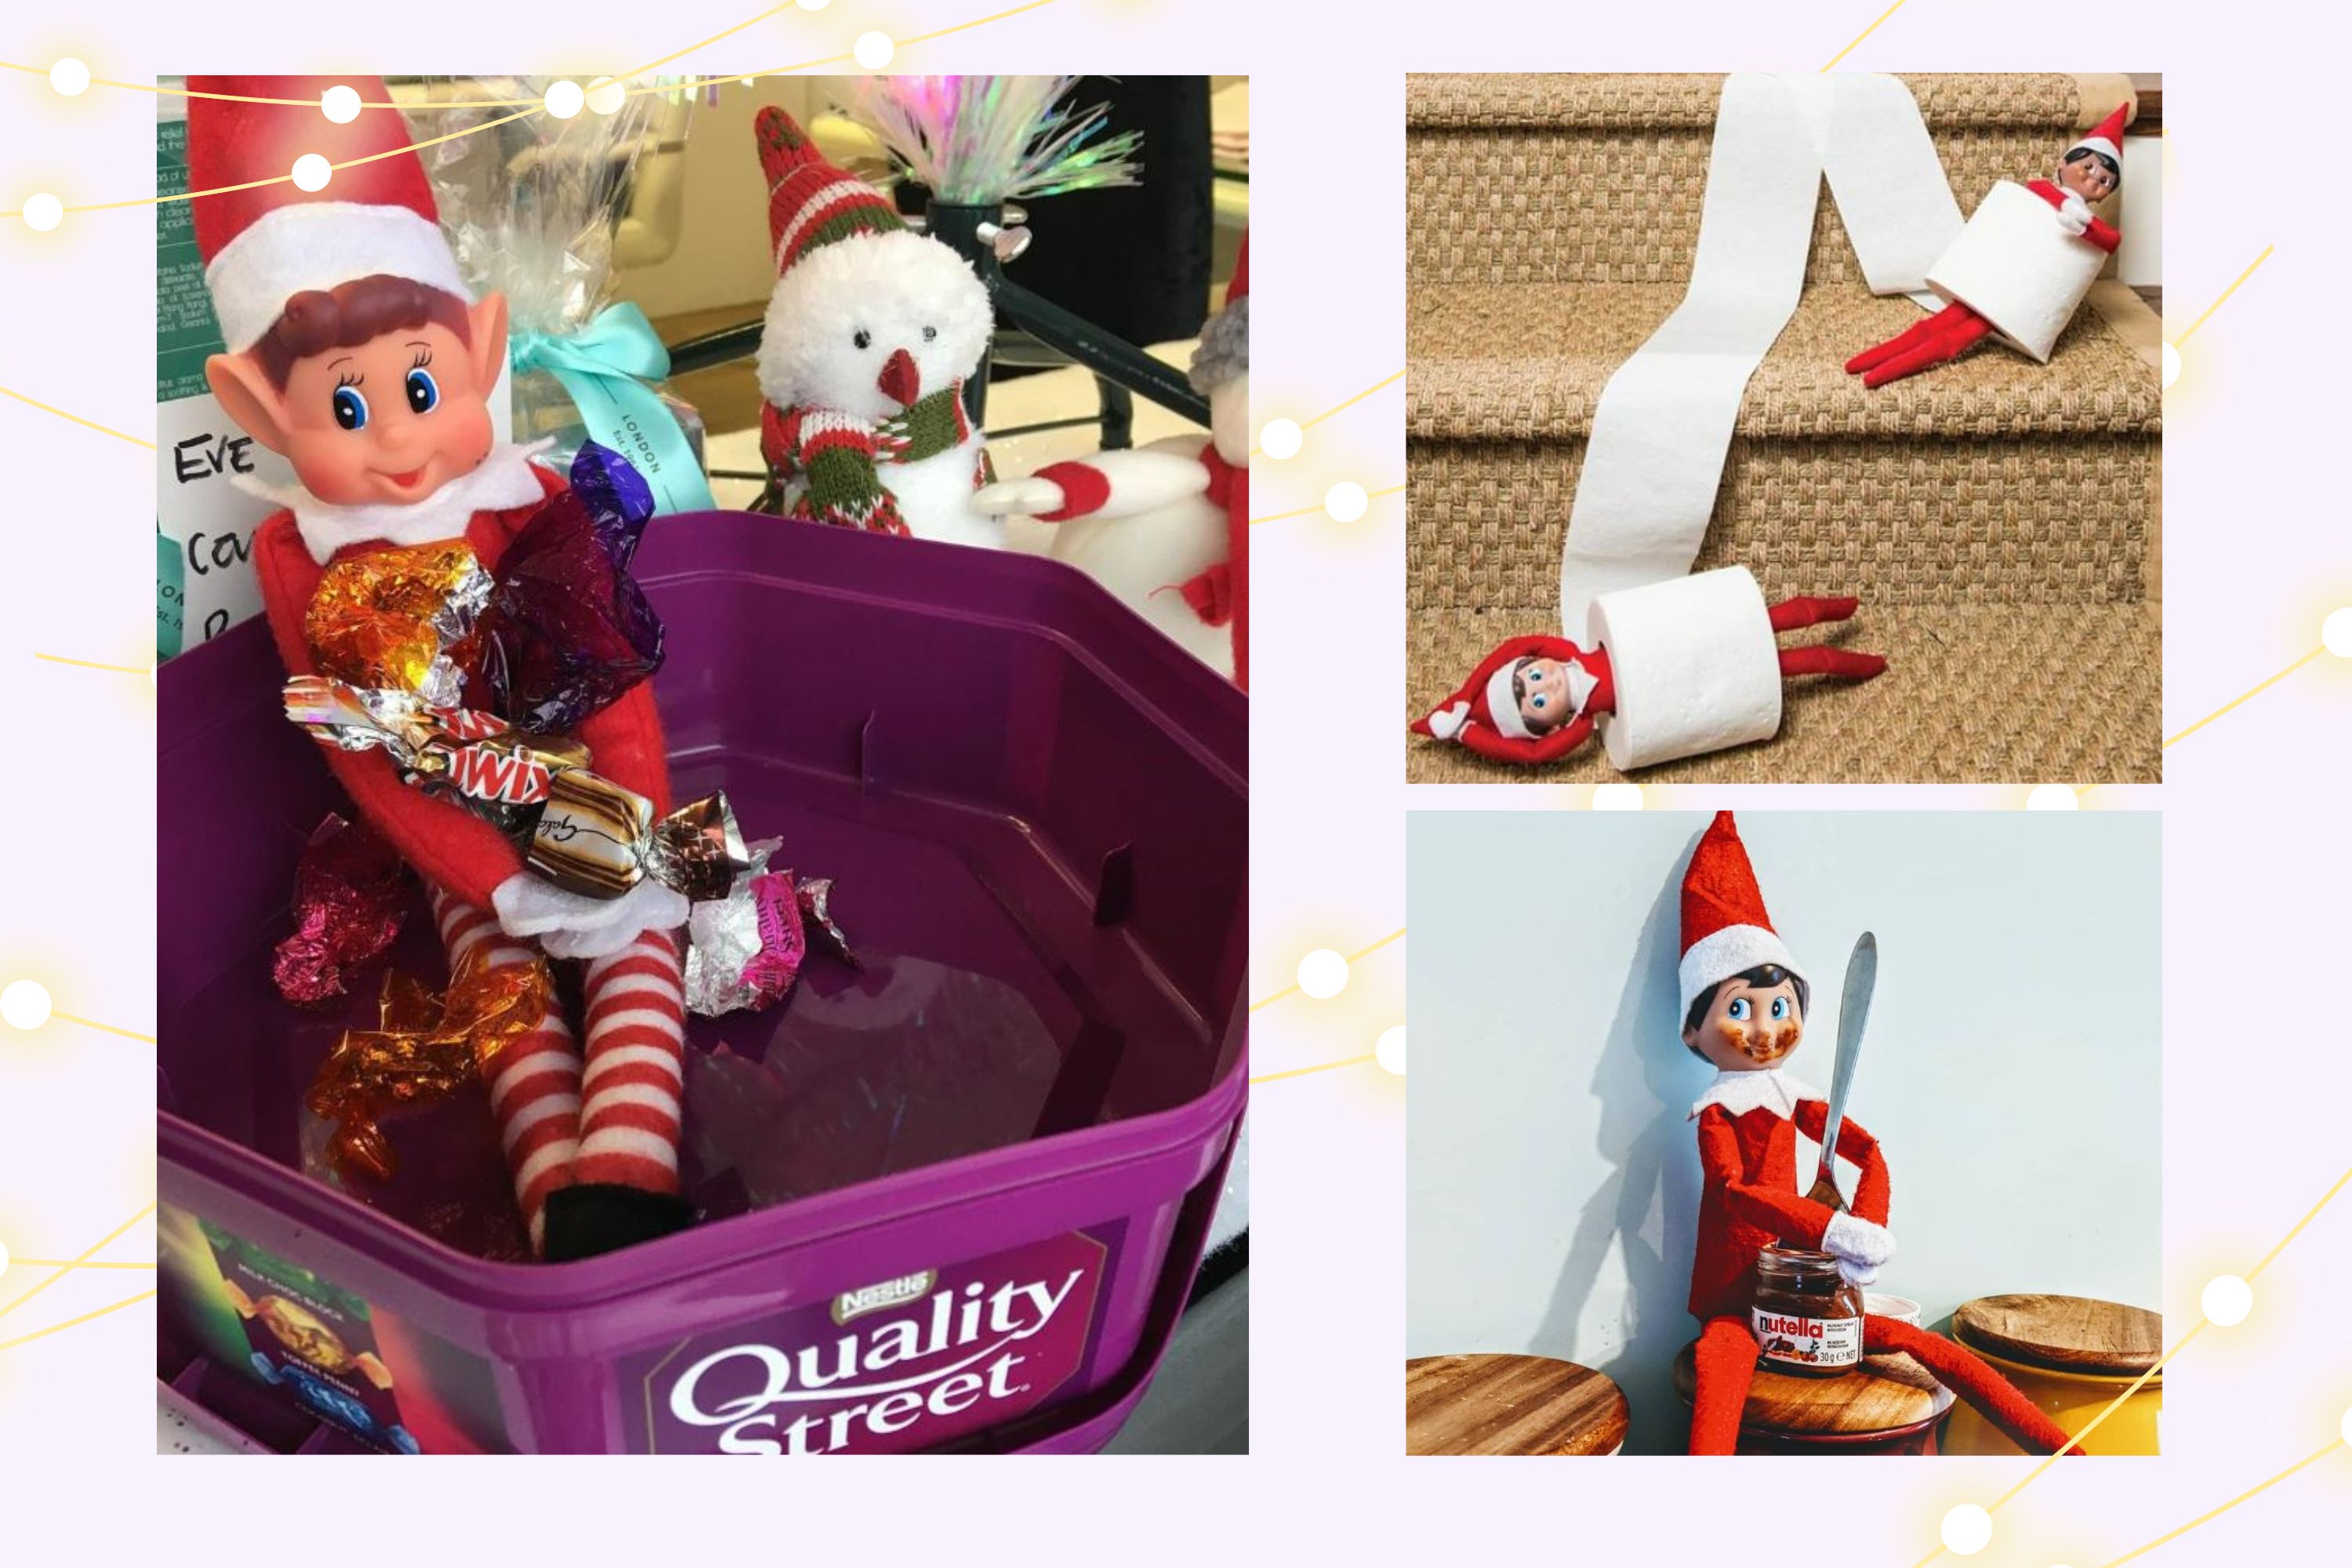 get-into-the-holiday-spirit-with-olaf-elf-on-a-shelf-click-to-see-the